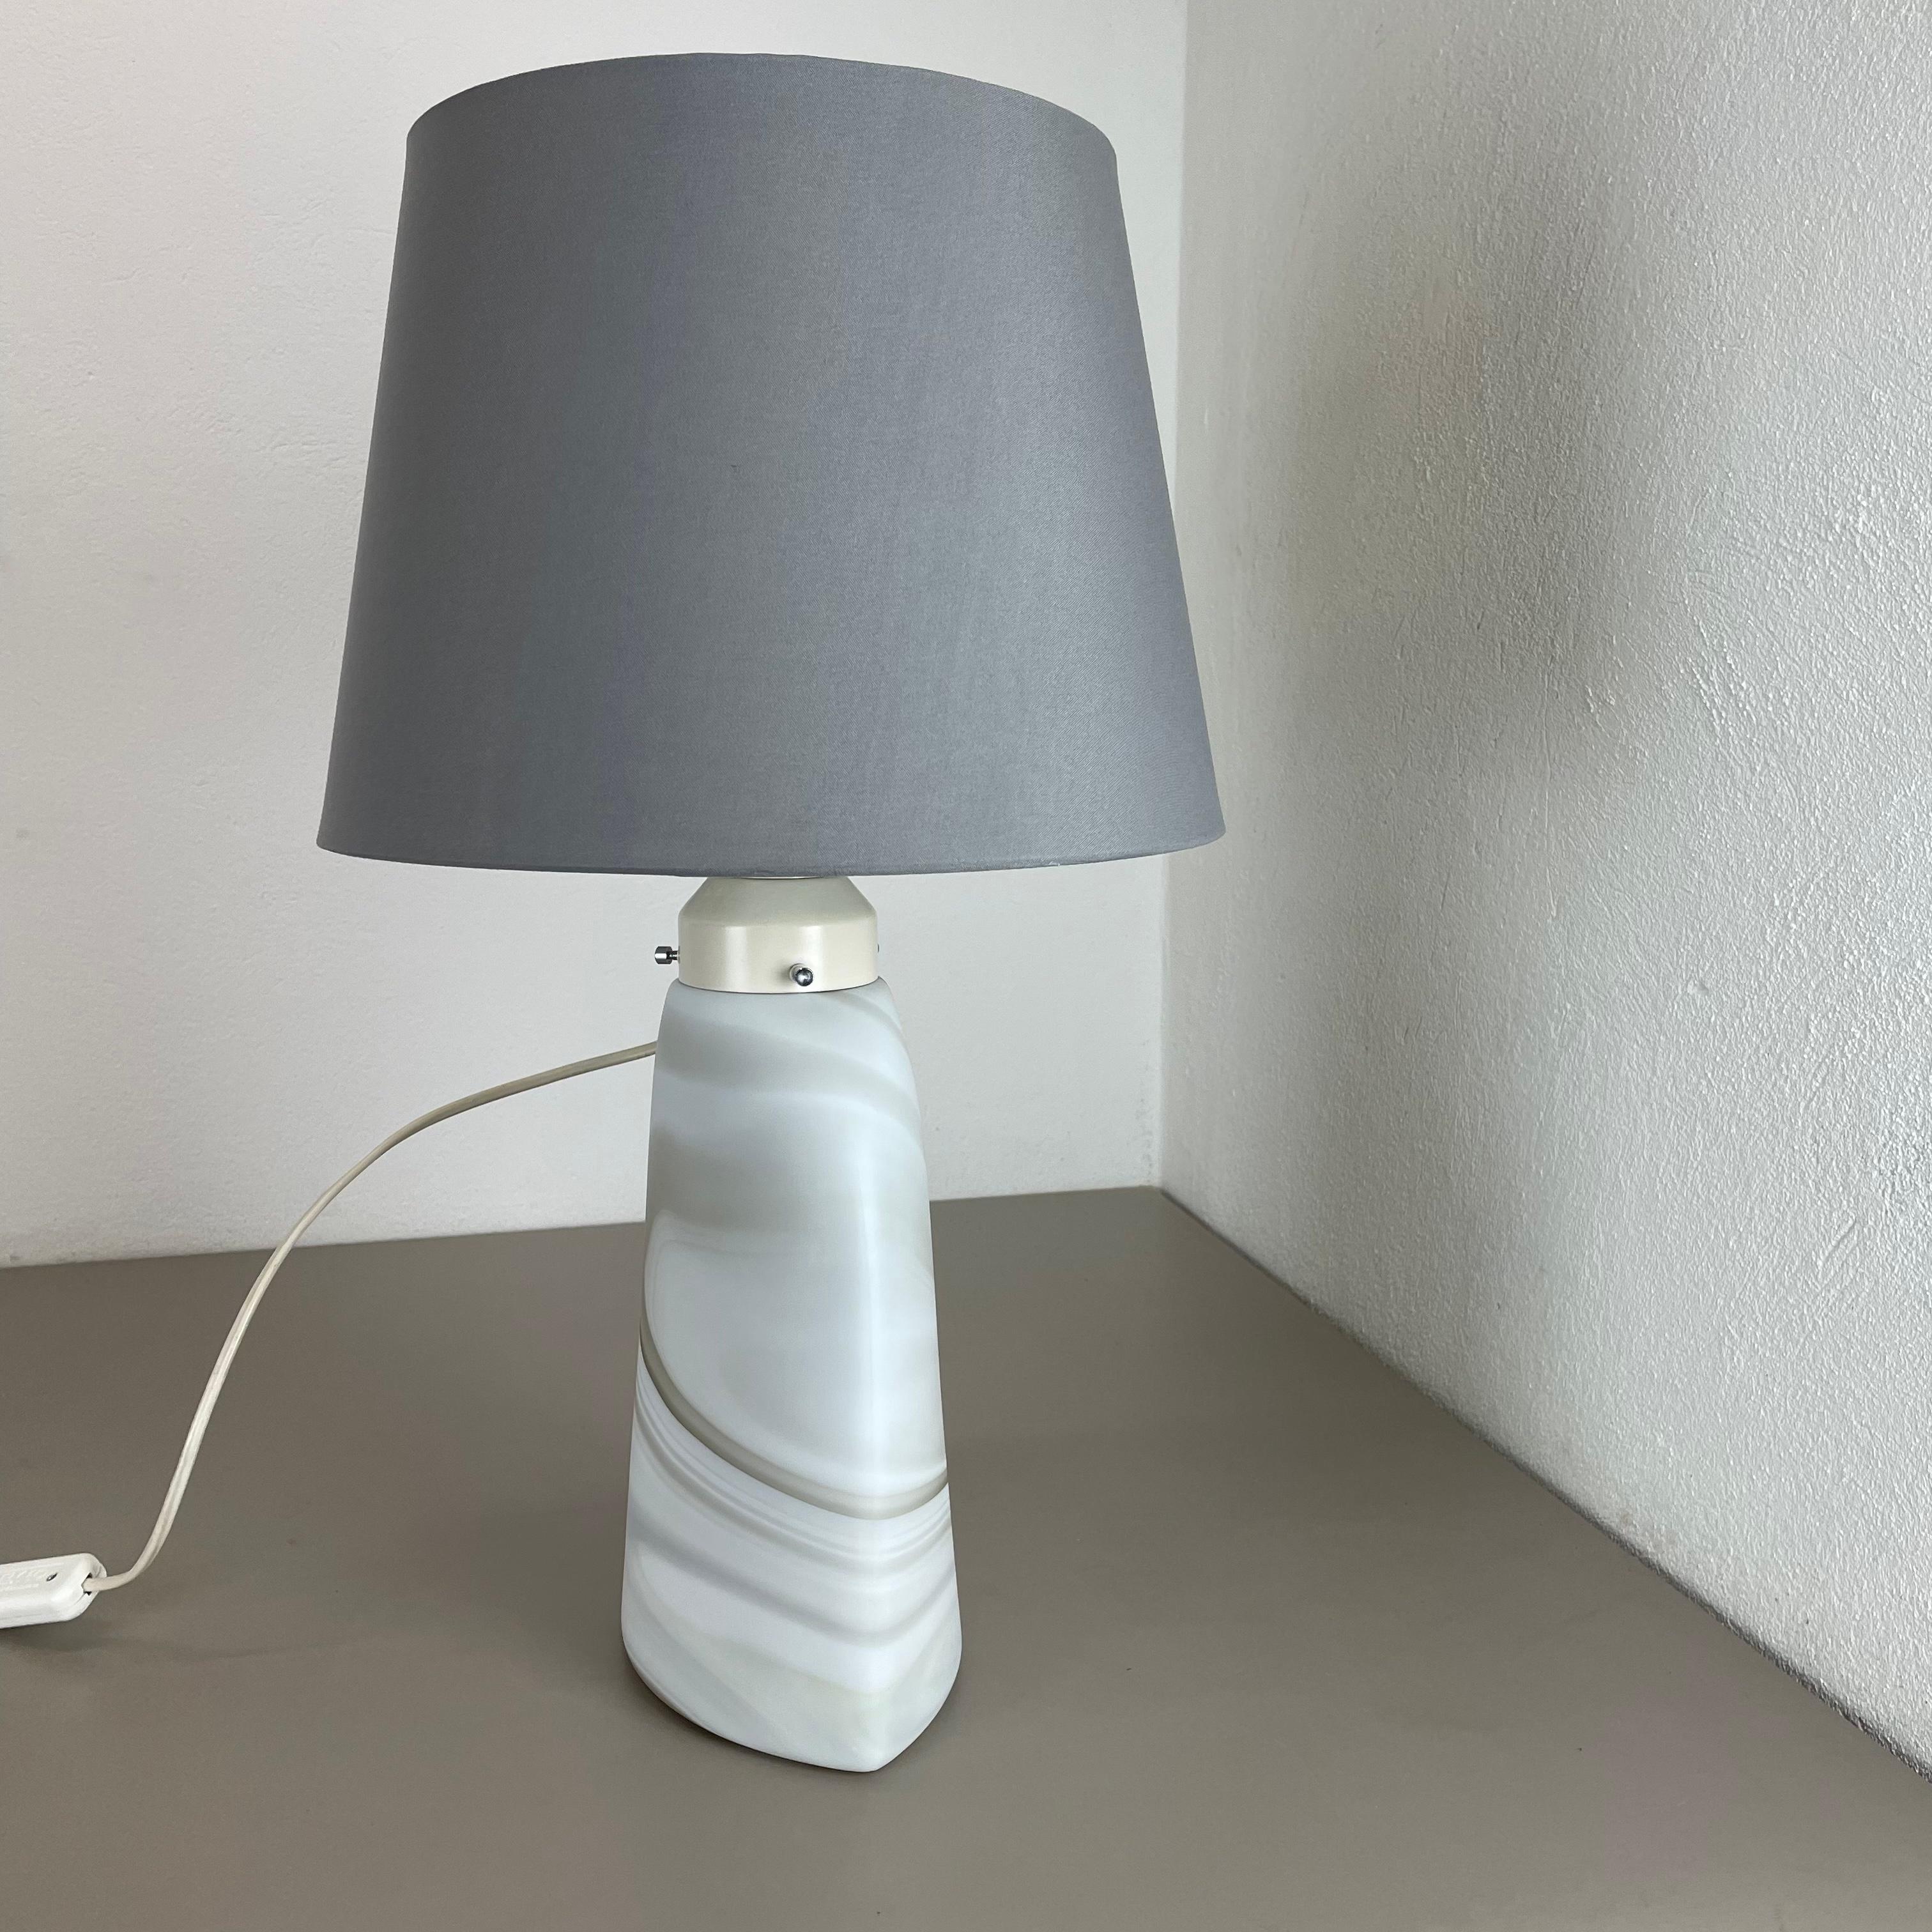 Article:

Glass table lamp, cararra series.


Producer:

Peill & Putzler, Germany



Age:

1970s



 

Original table light made in the 1970s by Peil & Putzler in Germany. The light base element is made of one piece of glass. it